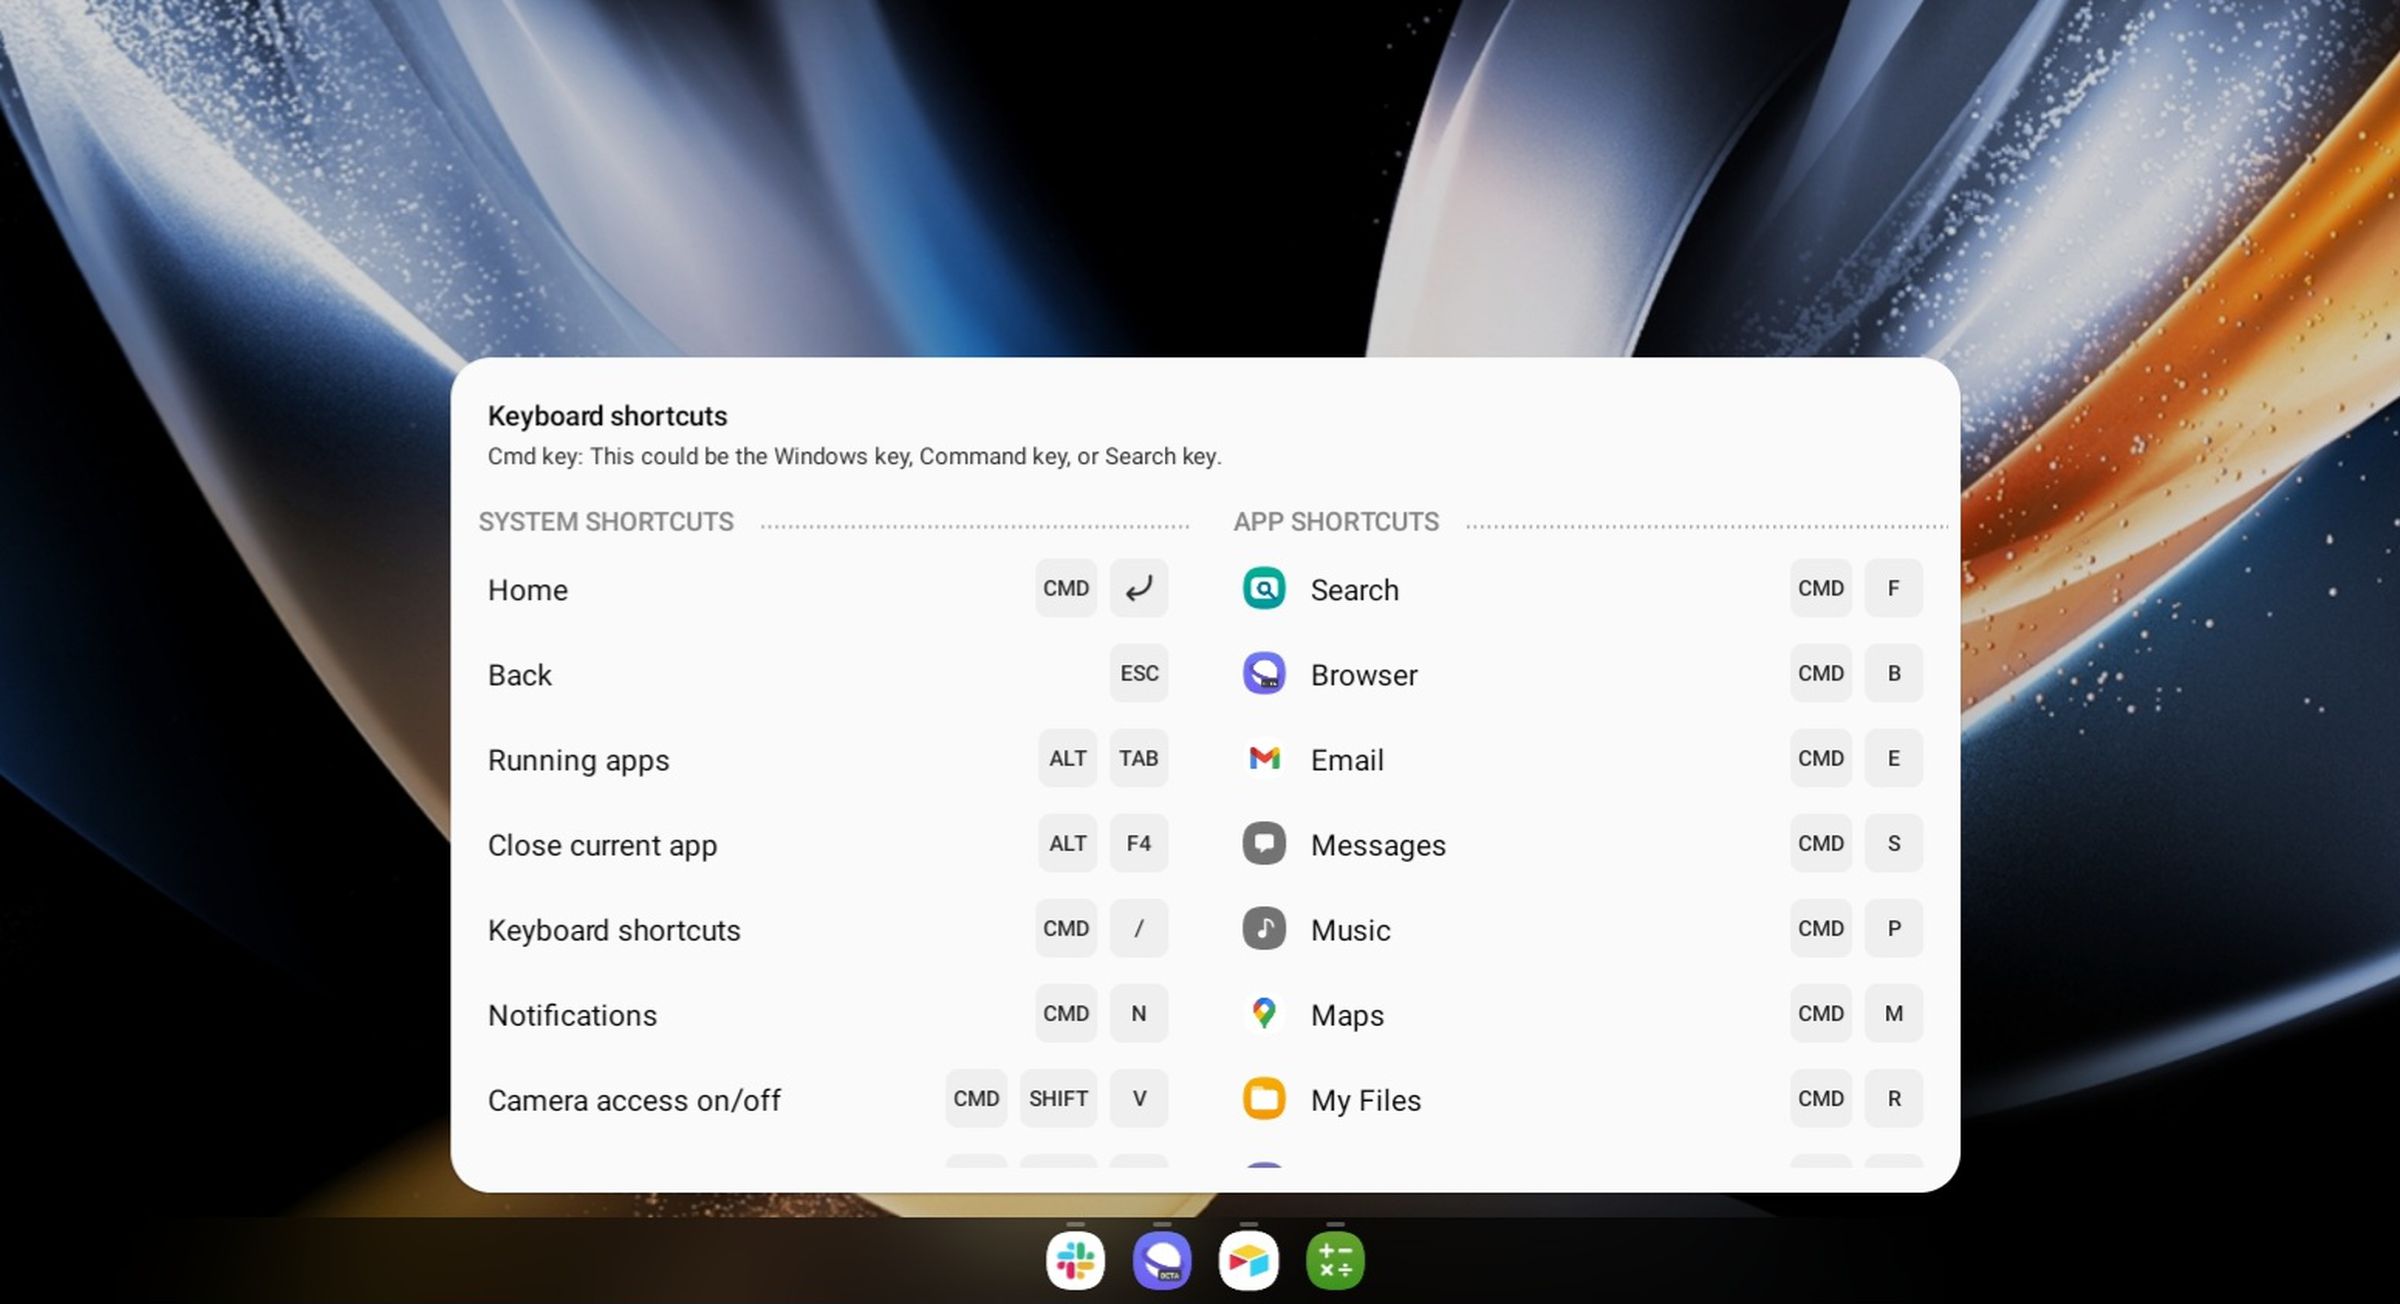 Dex now offers a surprisingly long list of supported keyboard shortcuts to make navigating it feel even more like a traditional desktop OS.